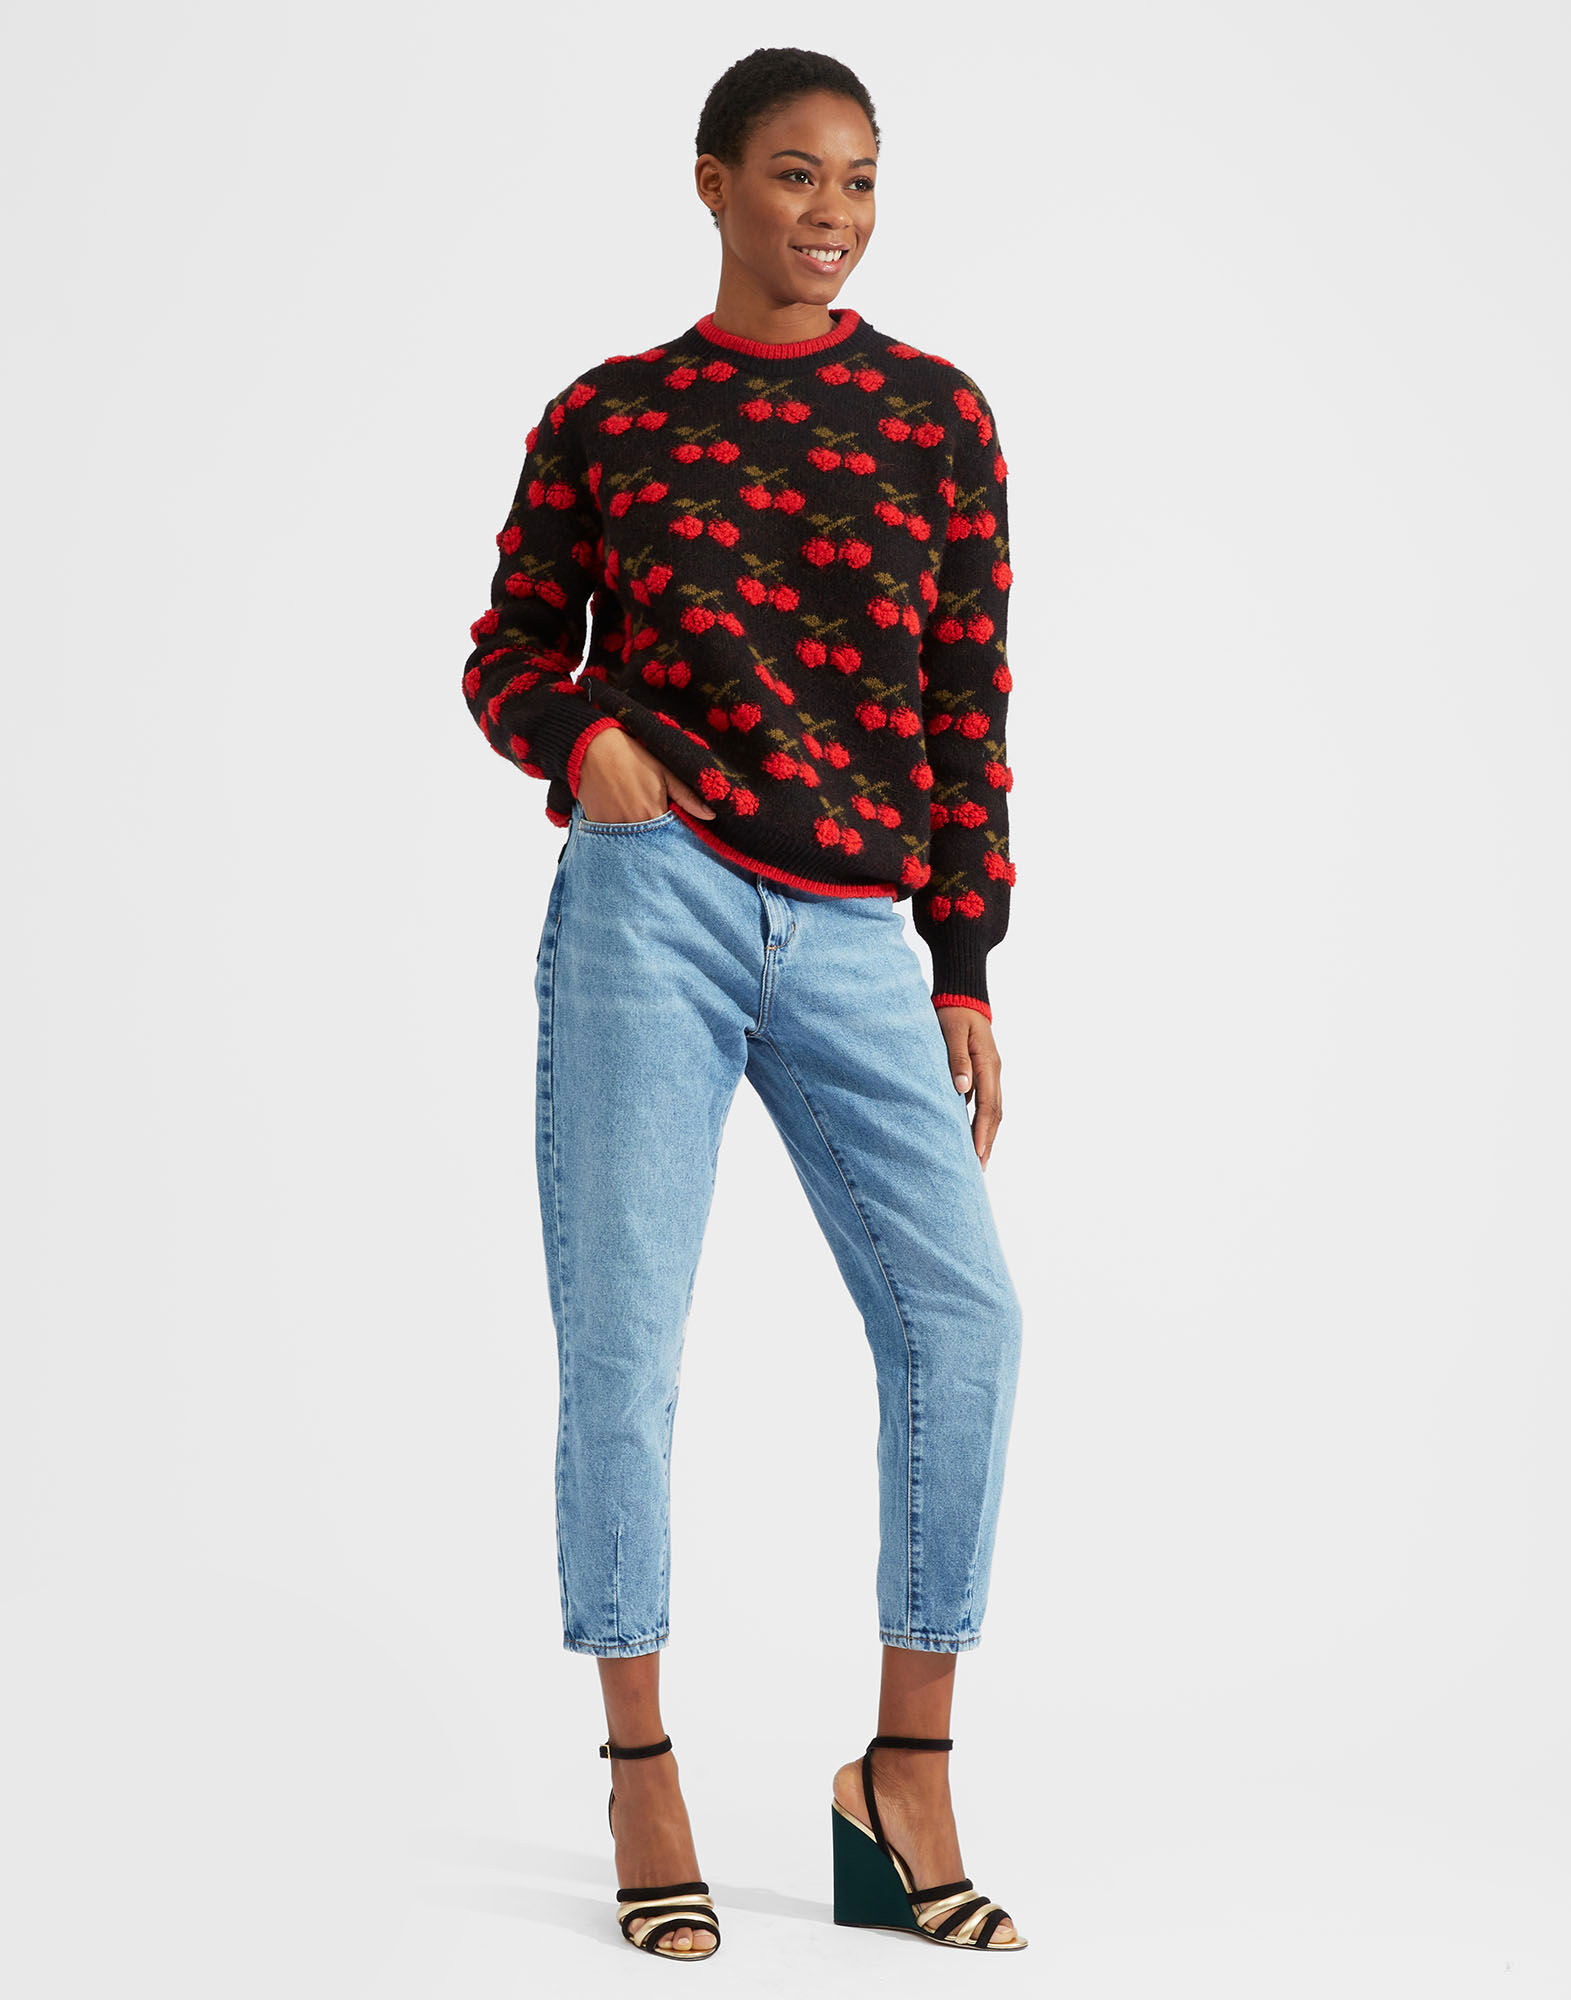 Cherry Sweater in Black / Red for Women